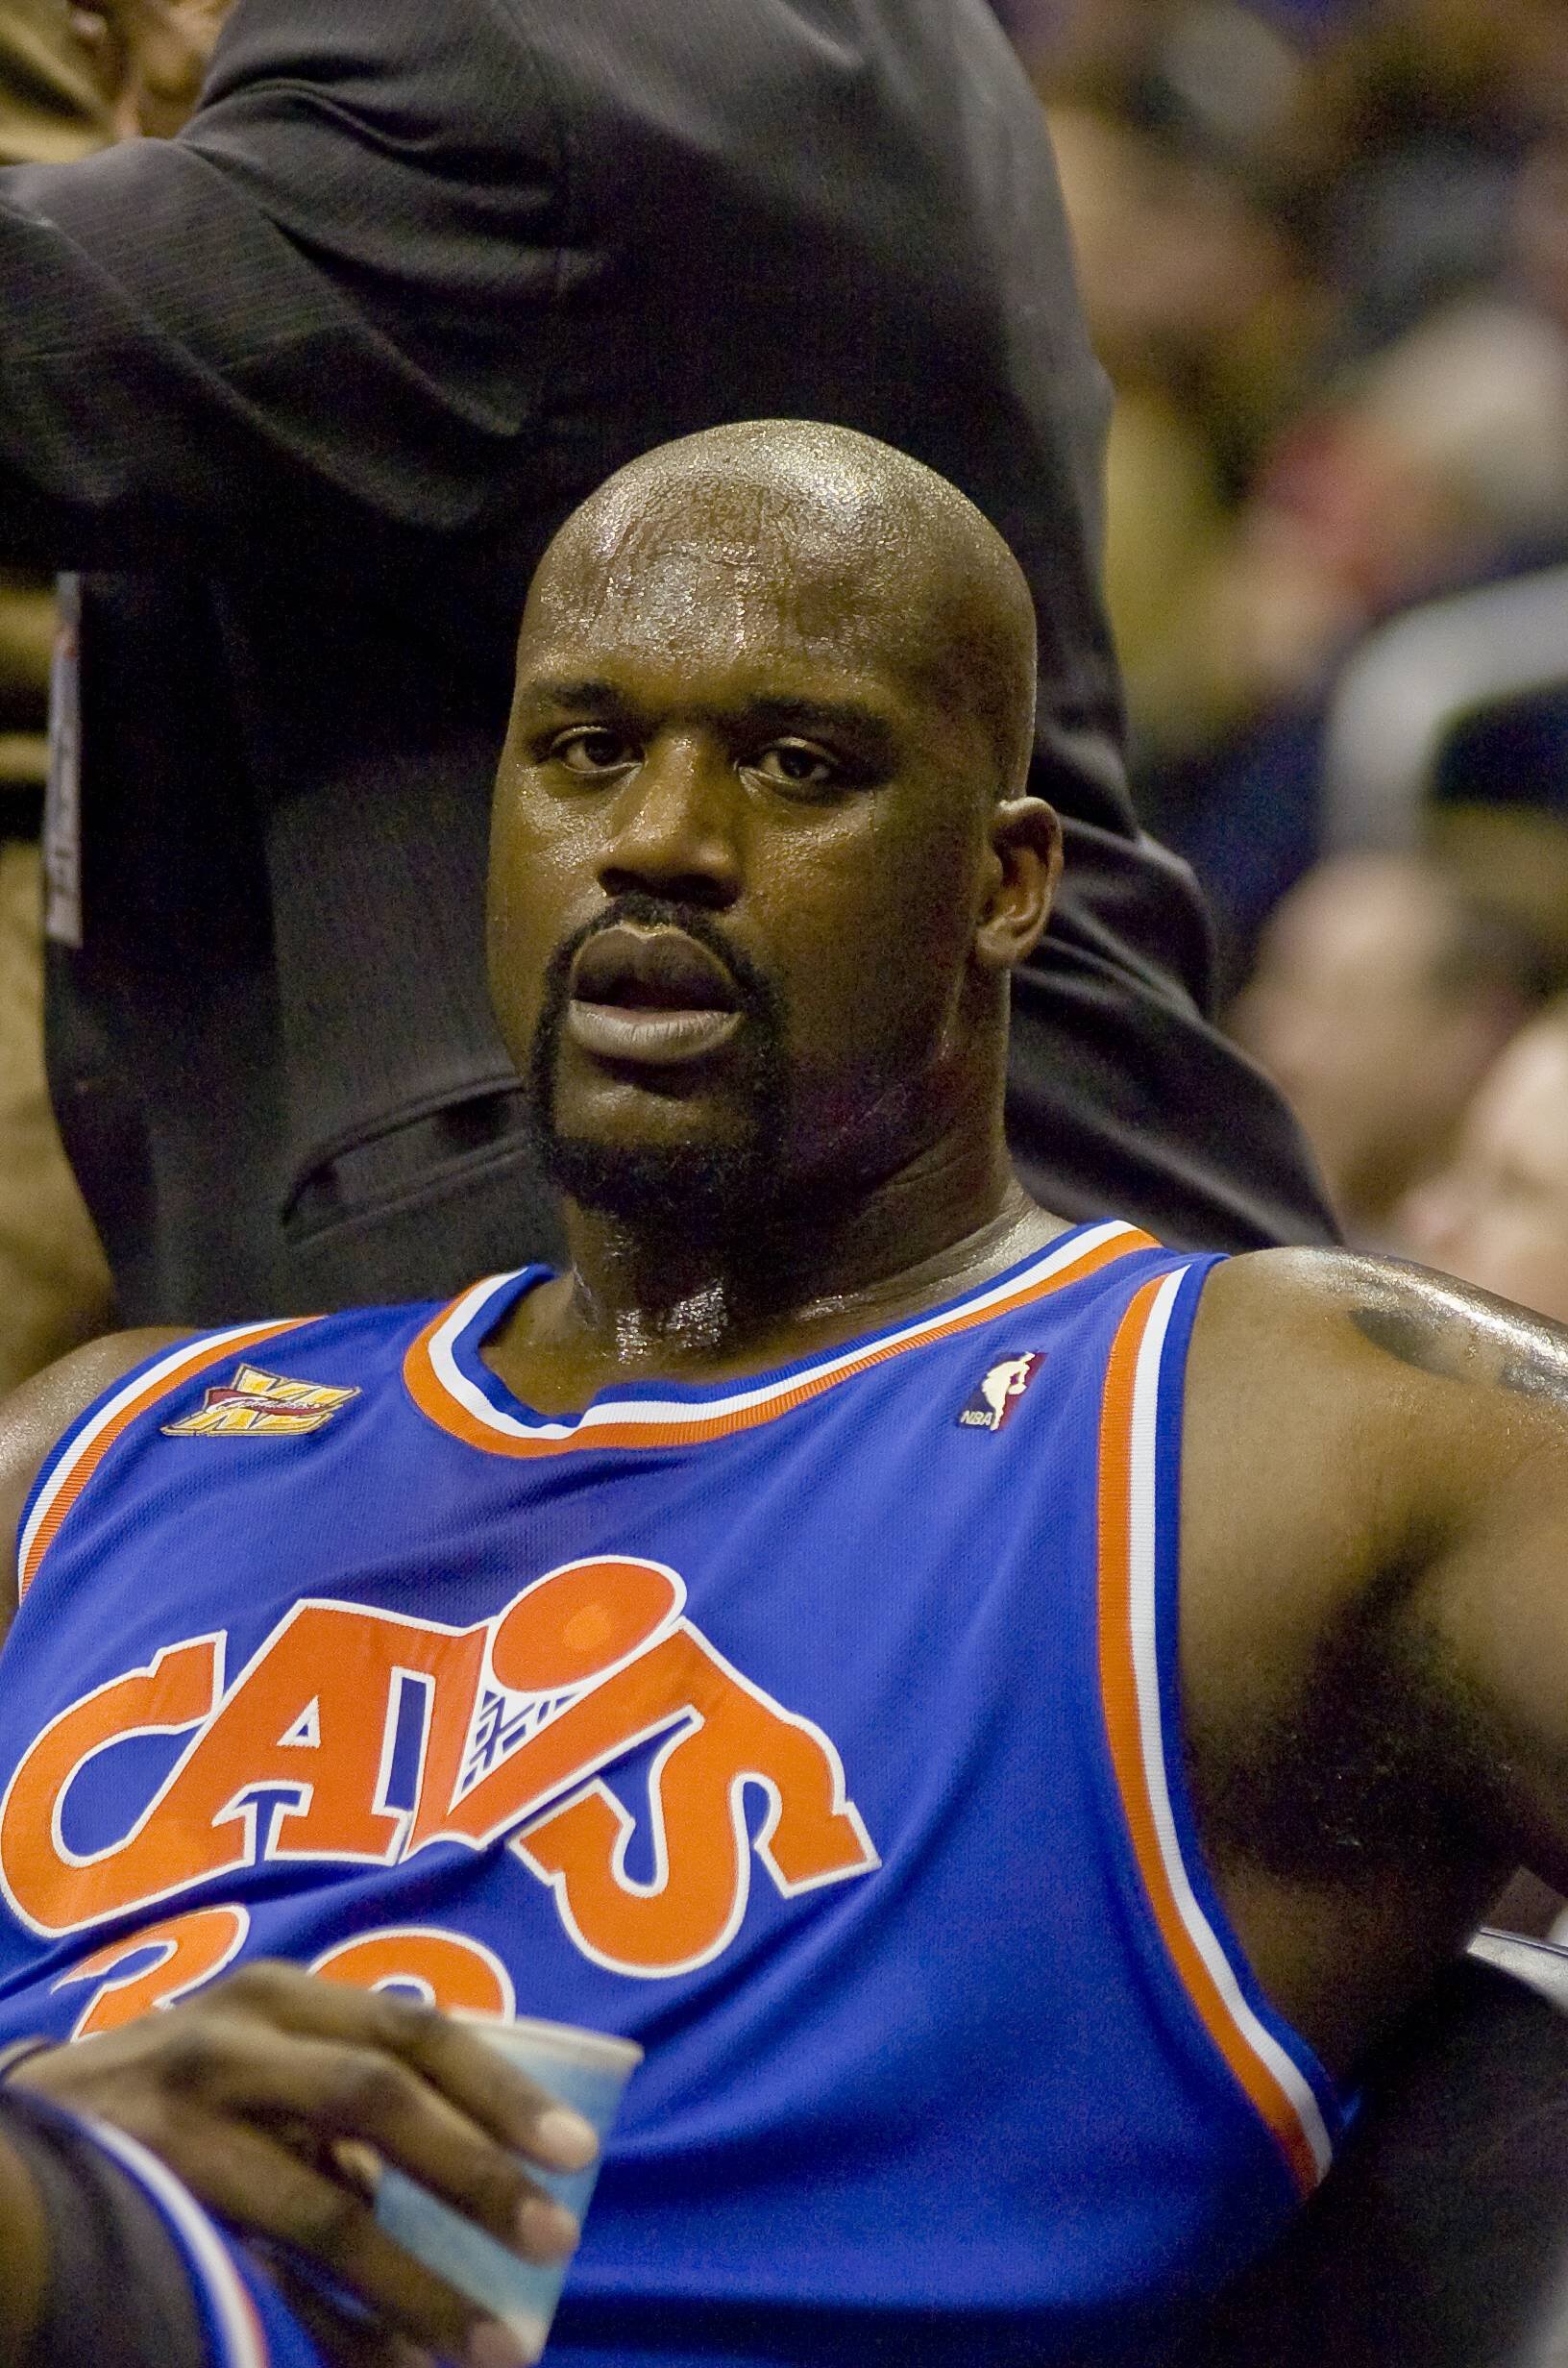 Pictures of Shaquille O'Neal - Pictures Of Celebrities1632 x 2464